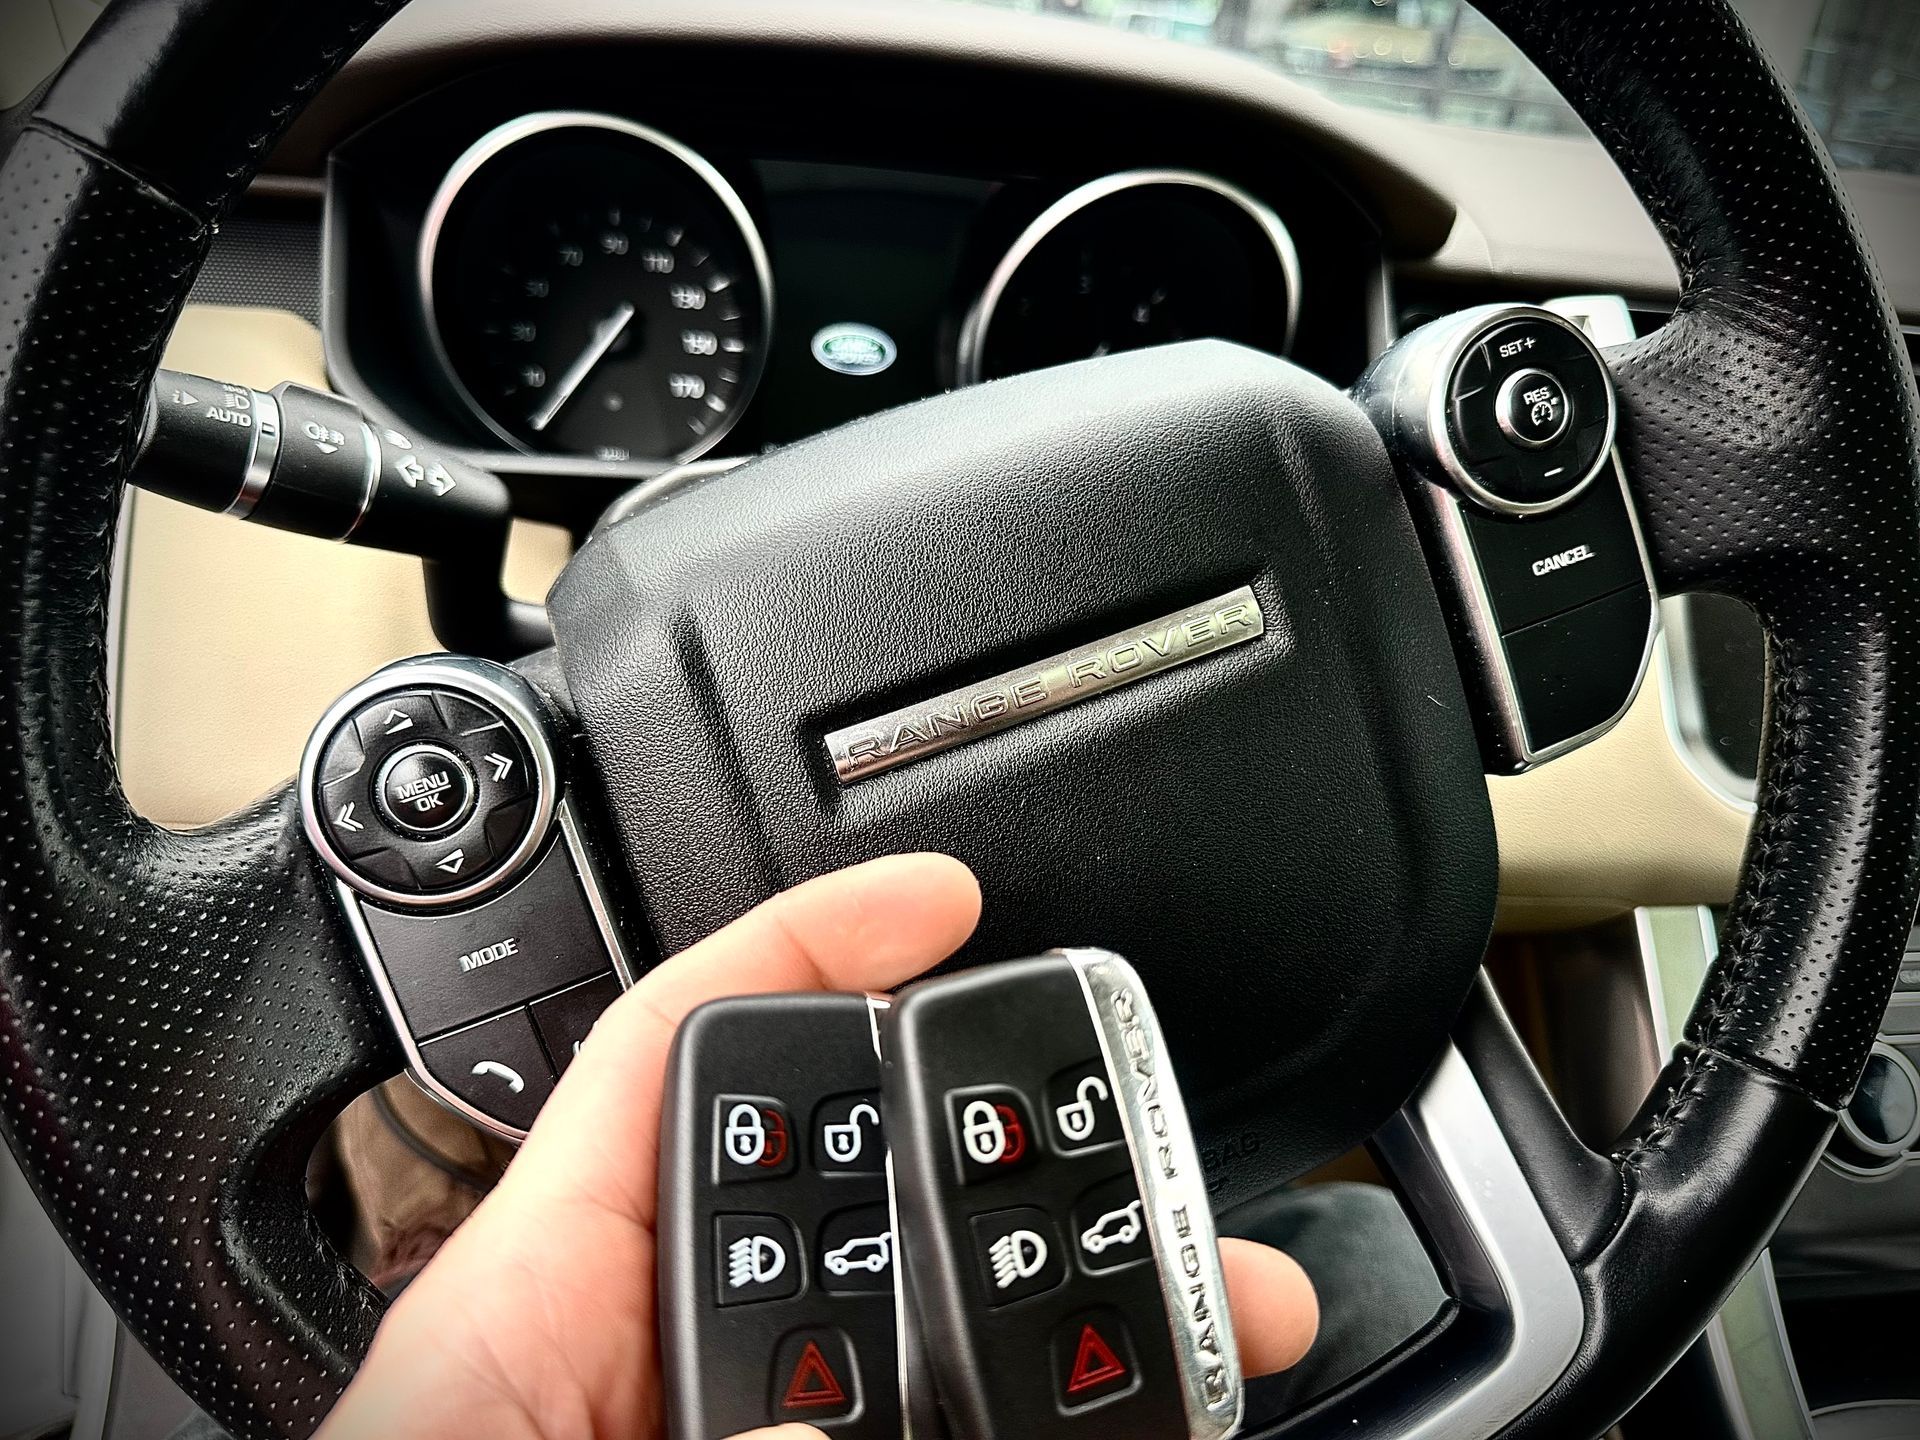 interior view of vehicle presenting a hand holding two key fobs in front of steering wheel